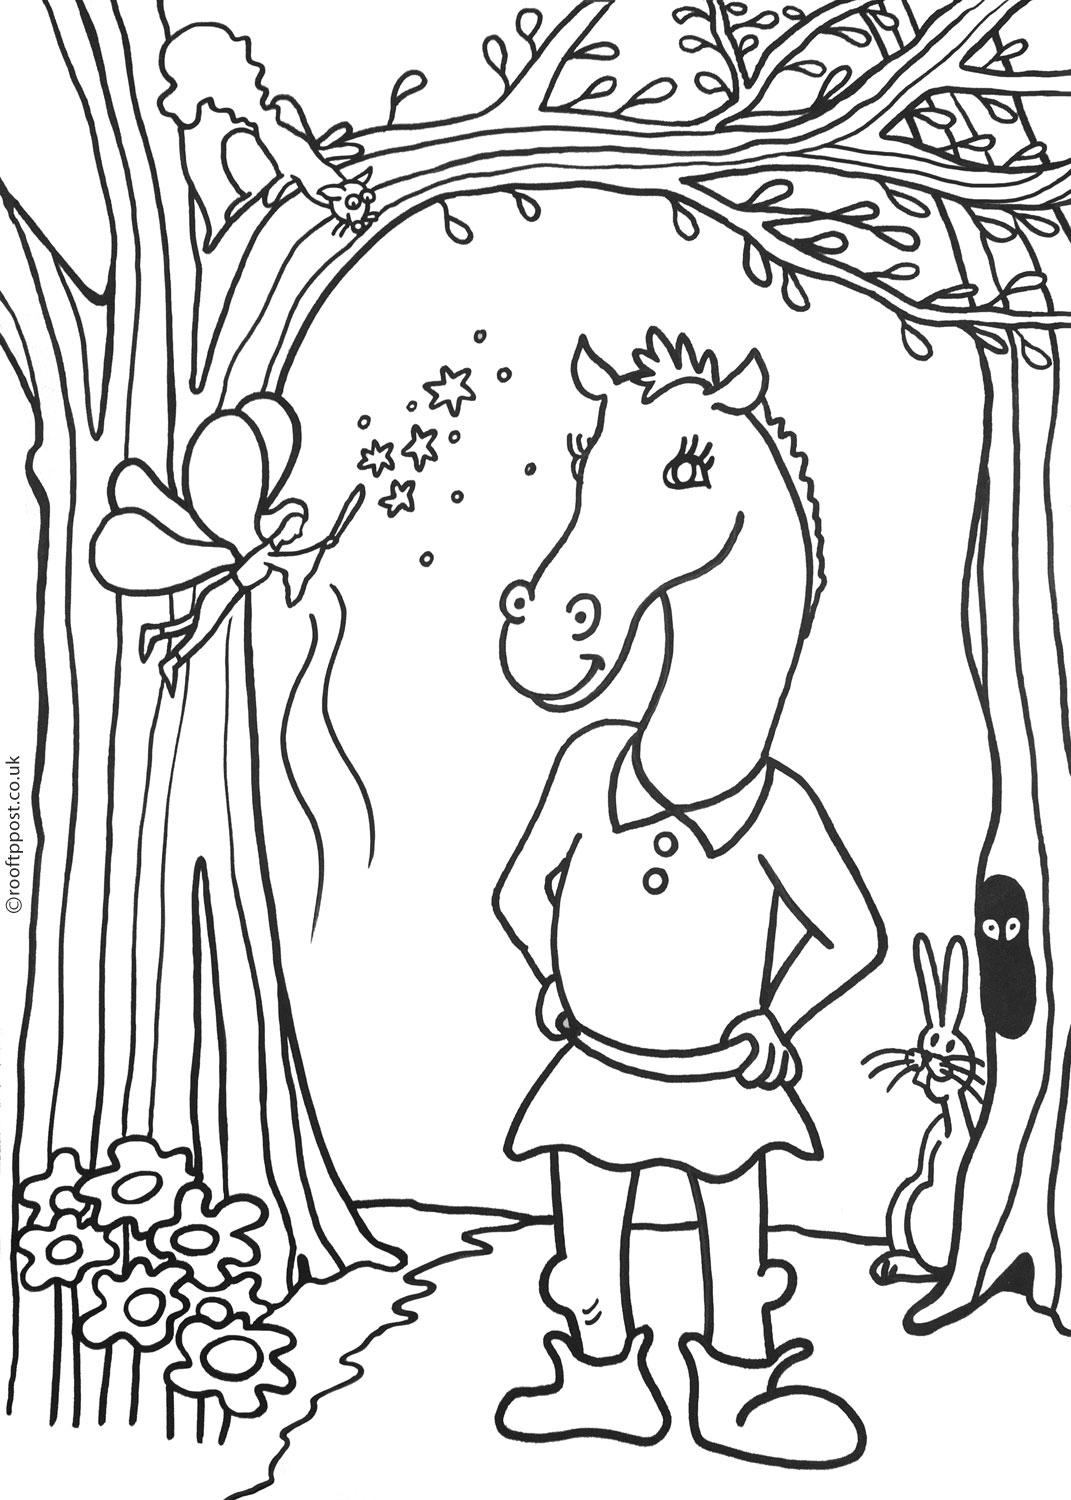 Kids colouring page of Bottom with a donkey's head, as in Shakespeare's magical play: A Midsummer Night's Dream